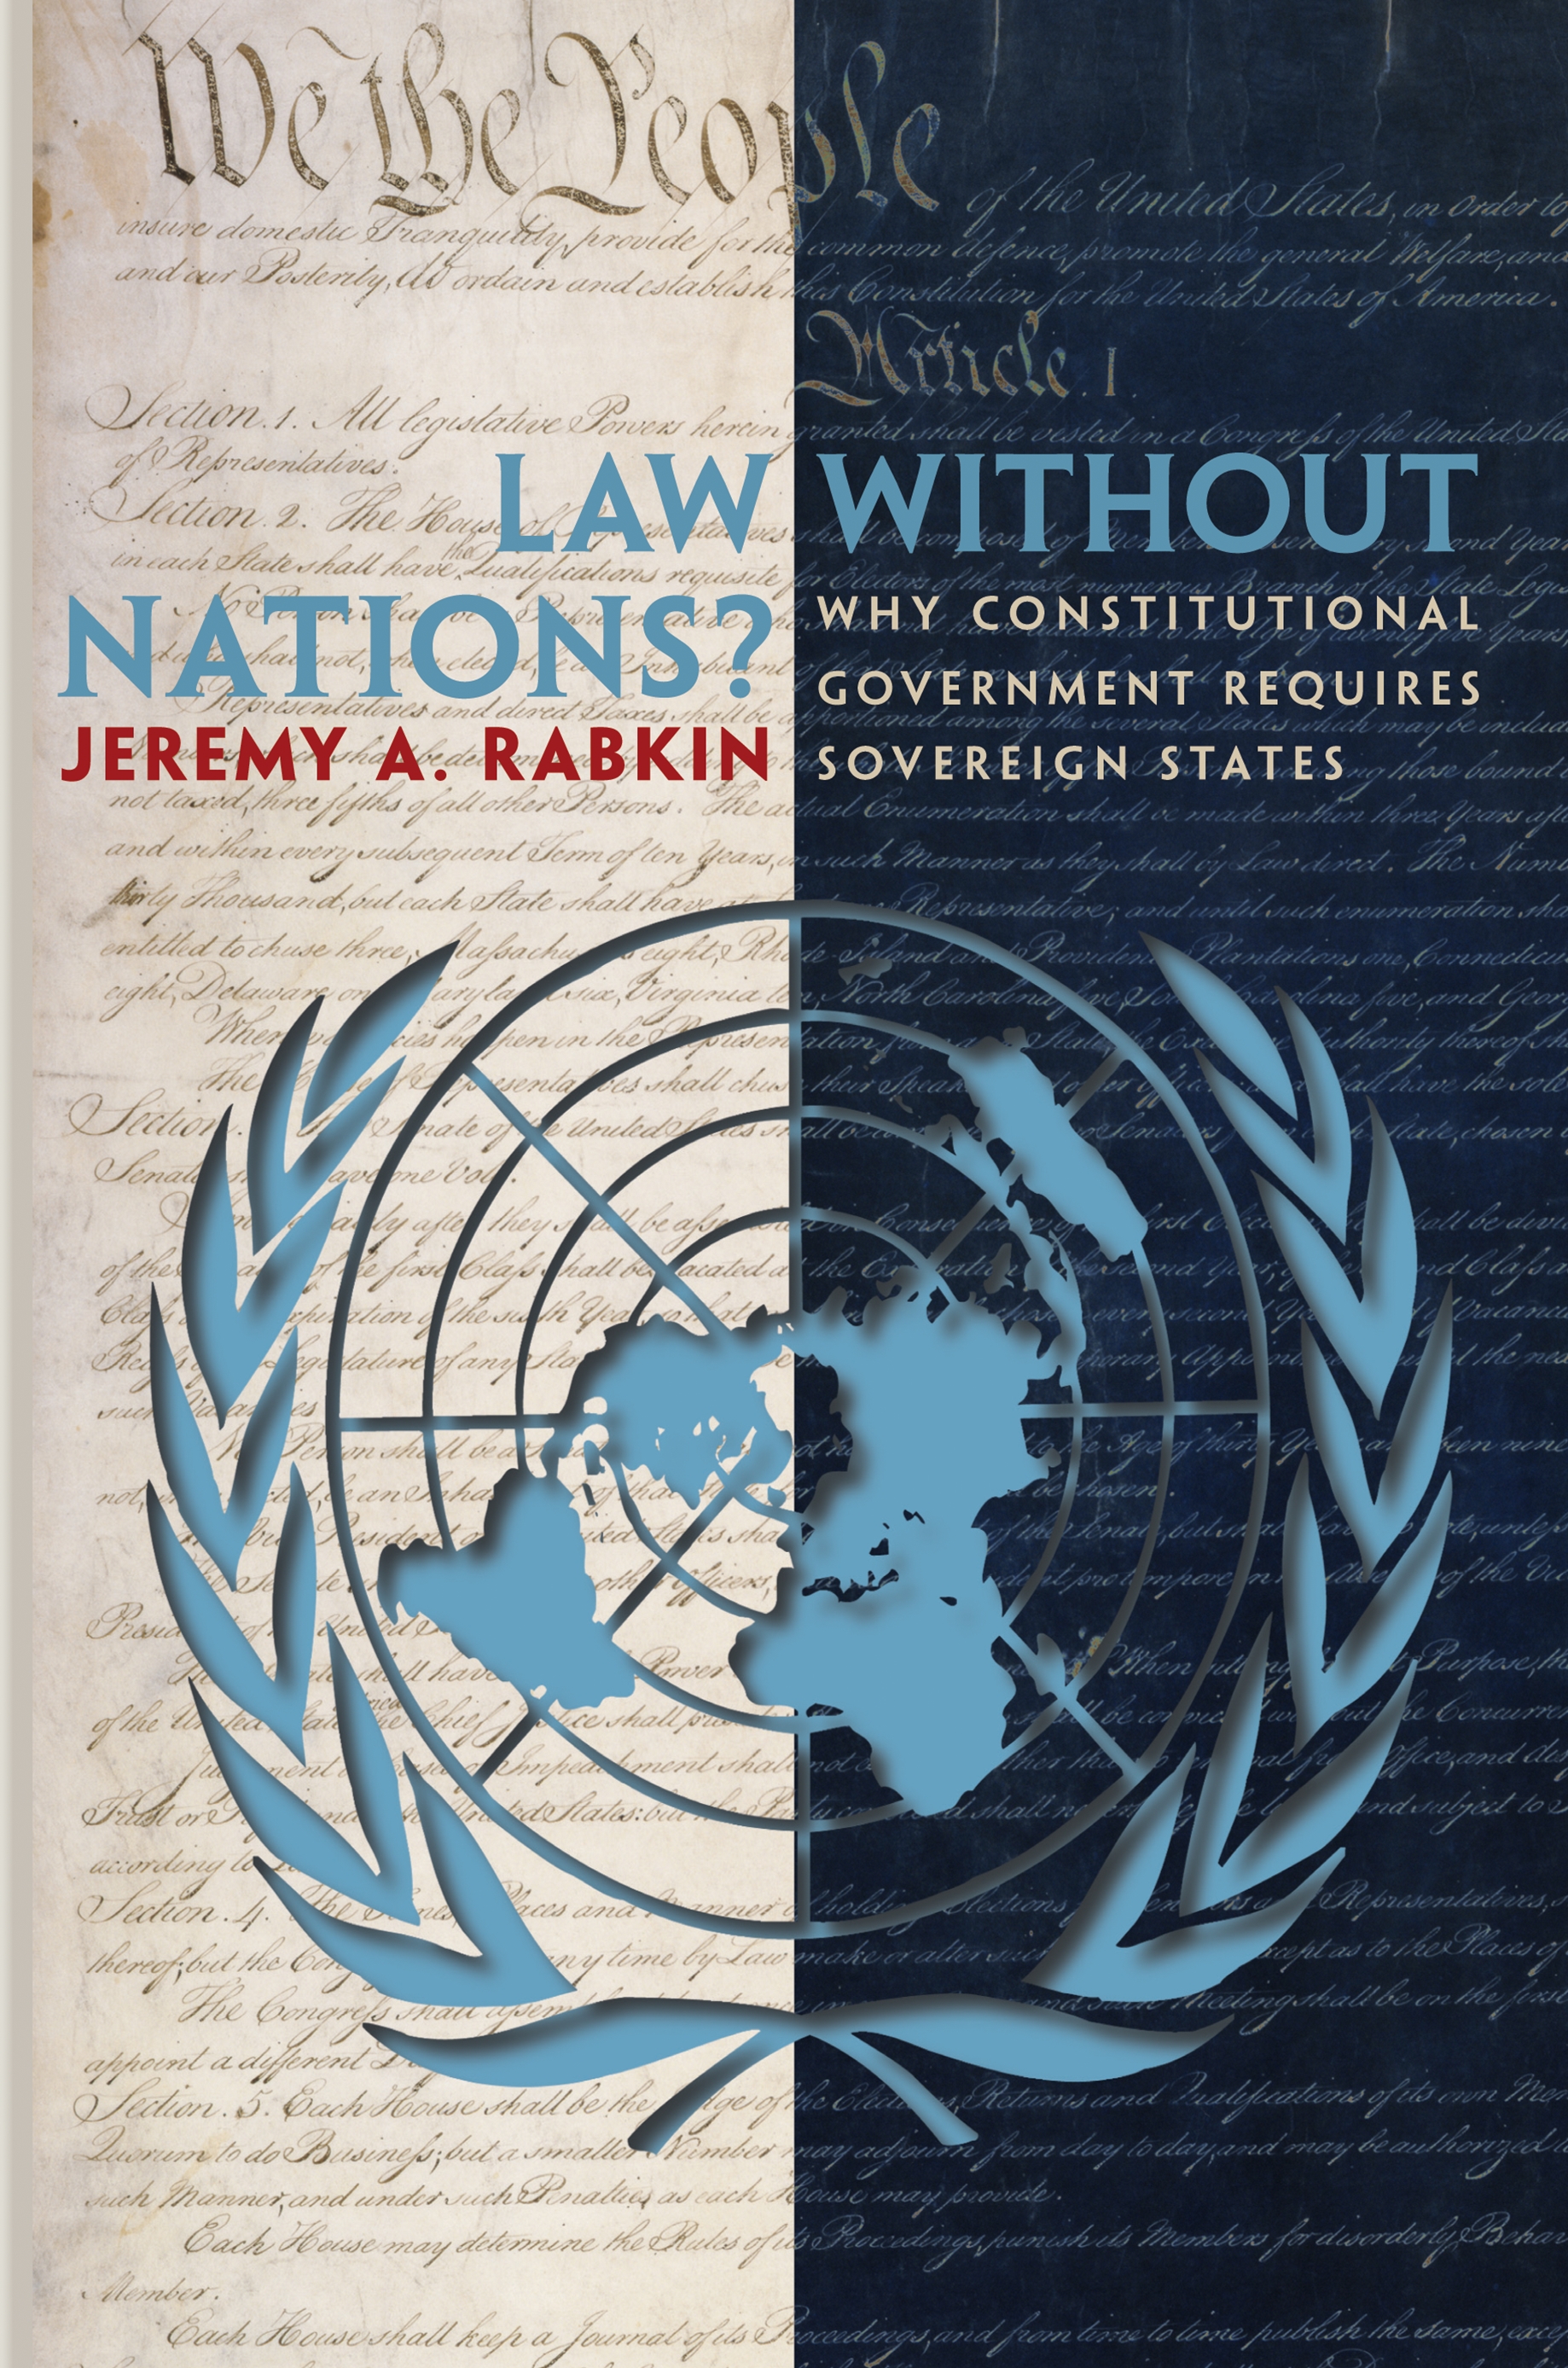 Nations without State. International Law. Law without law